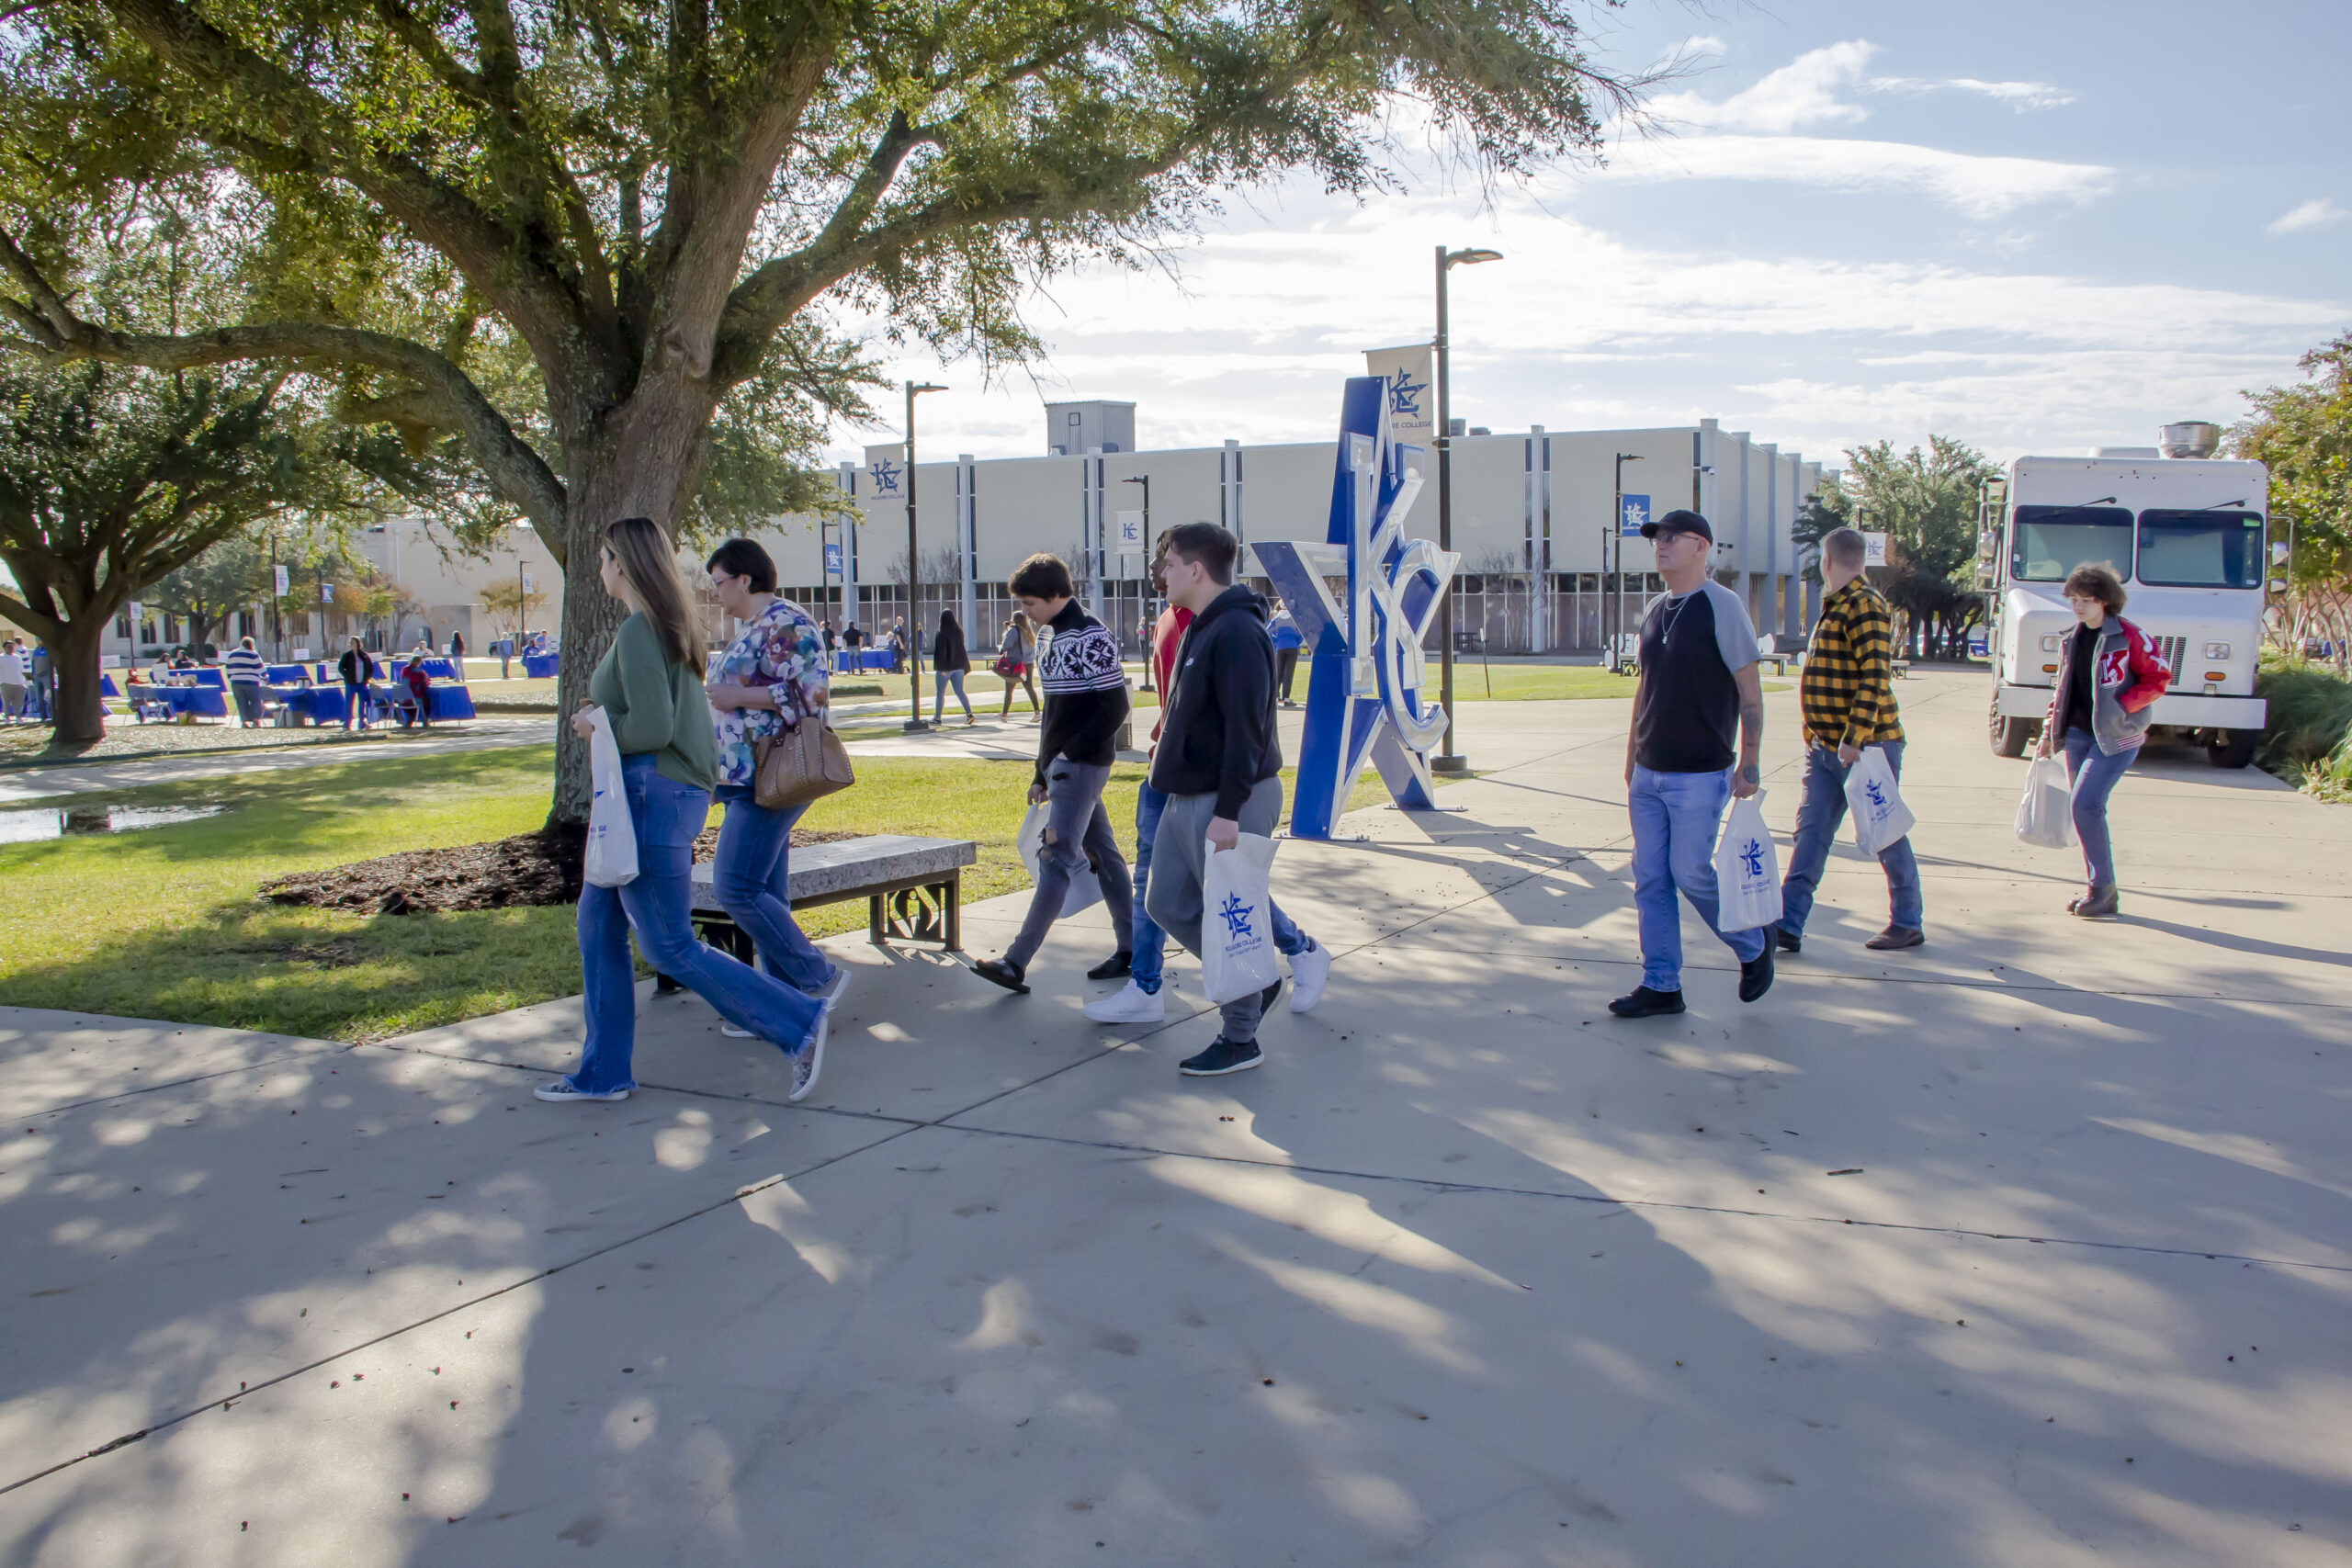 Students and parents walking around the campus at Kilgore College